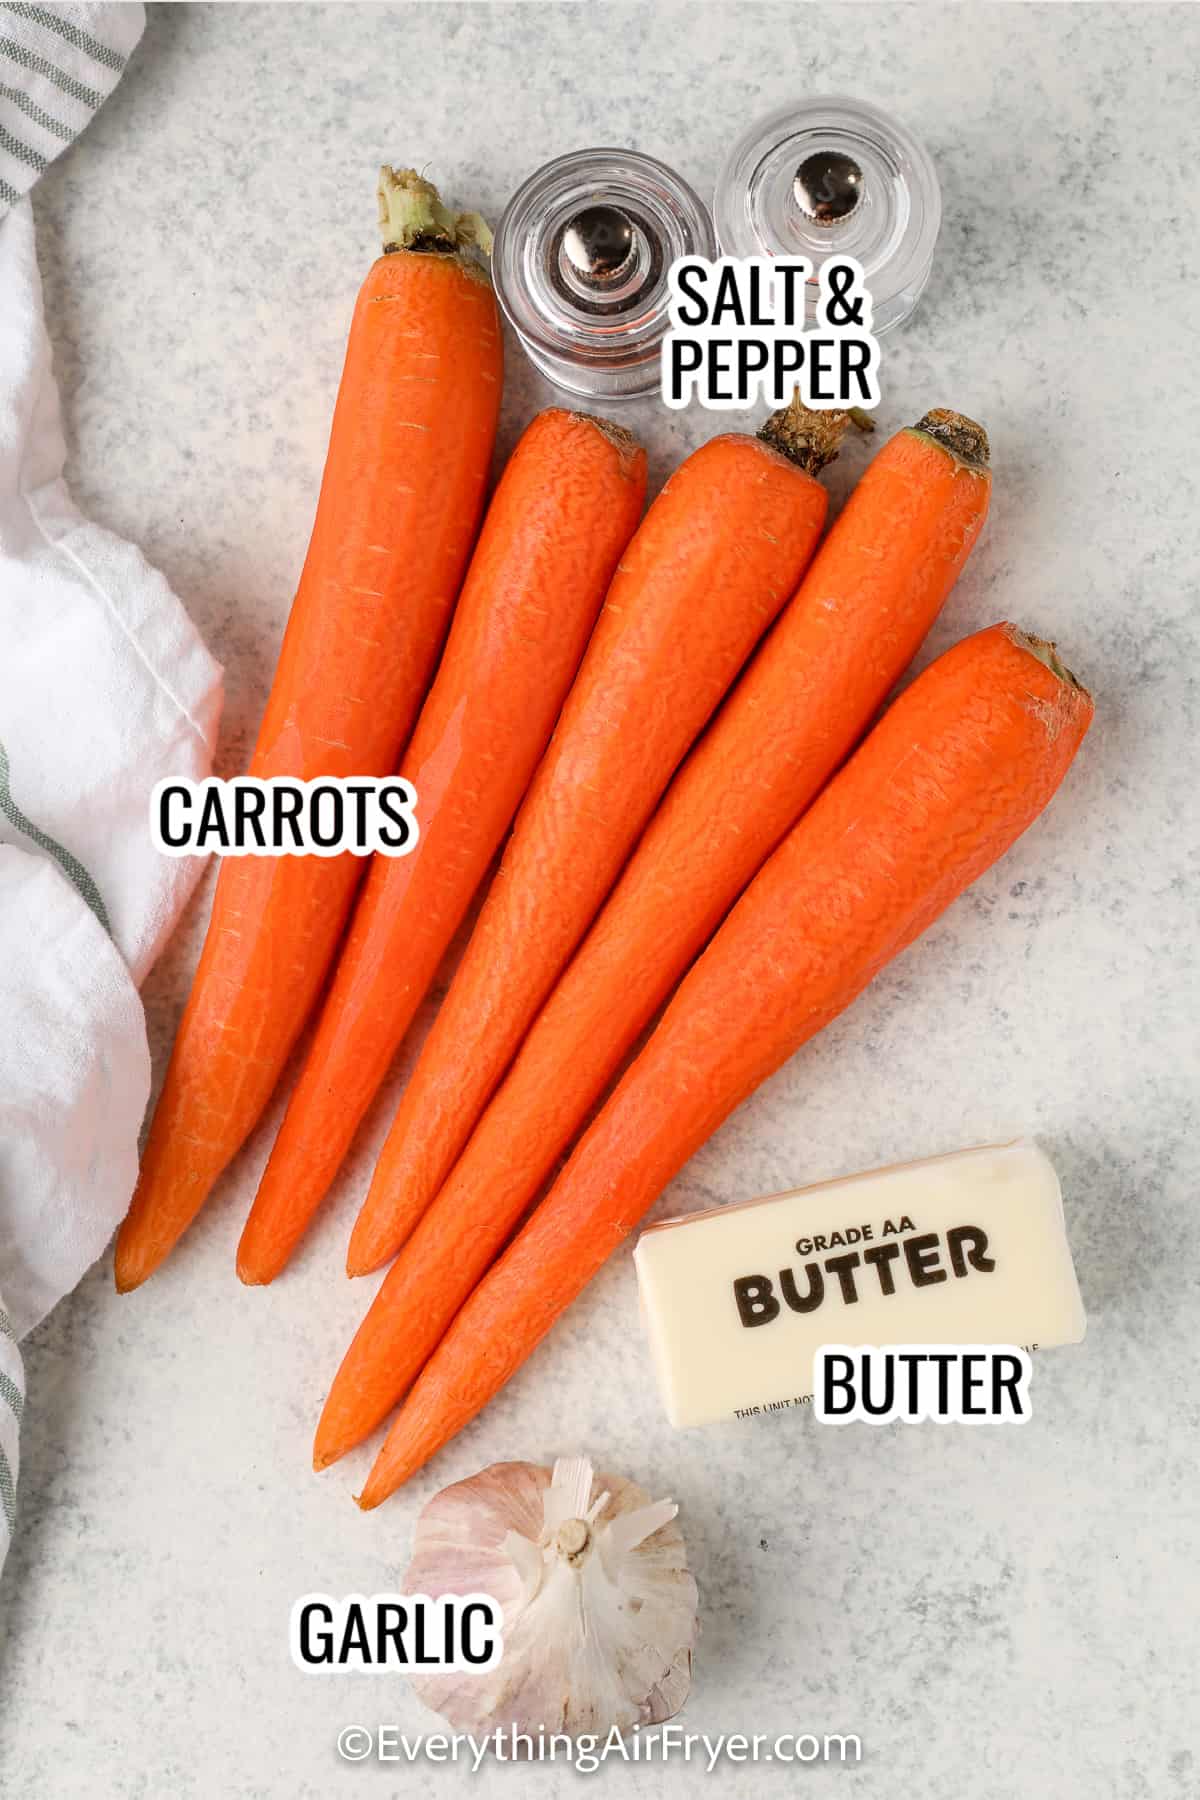 ingredients assembled to make air fryer carrots including carrots, butter, garlic, and salt and pepper